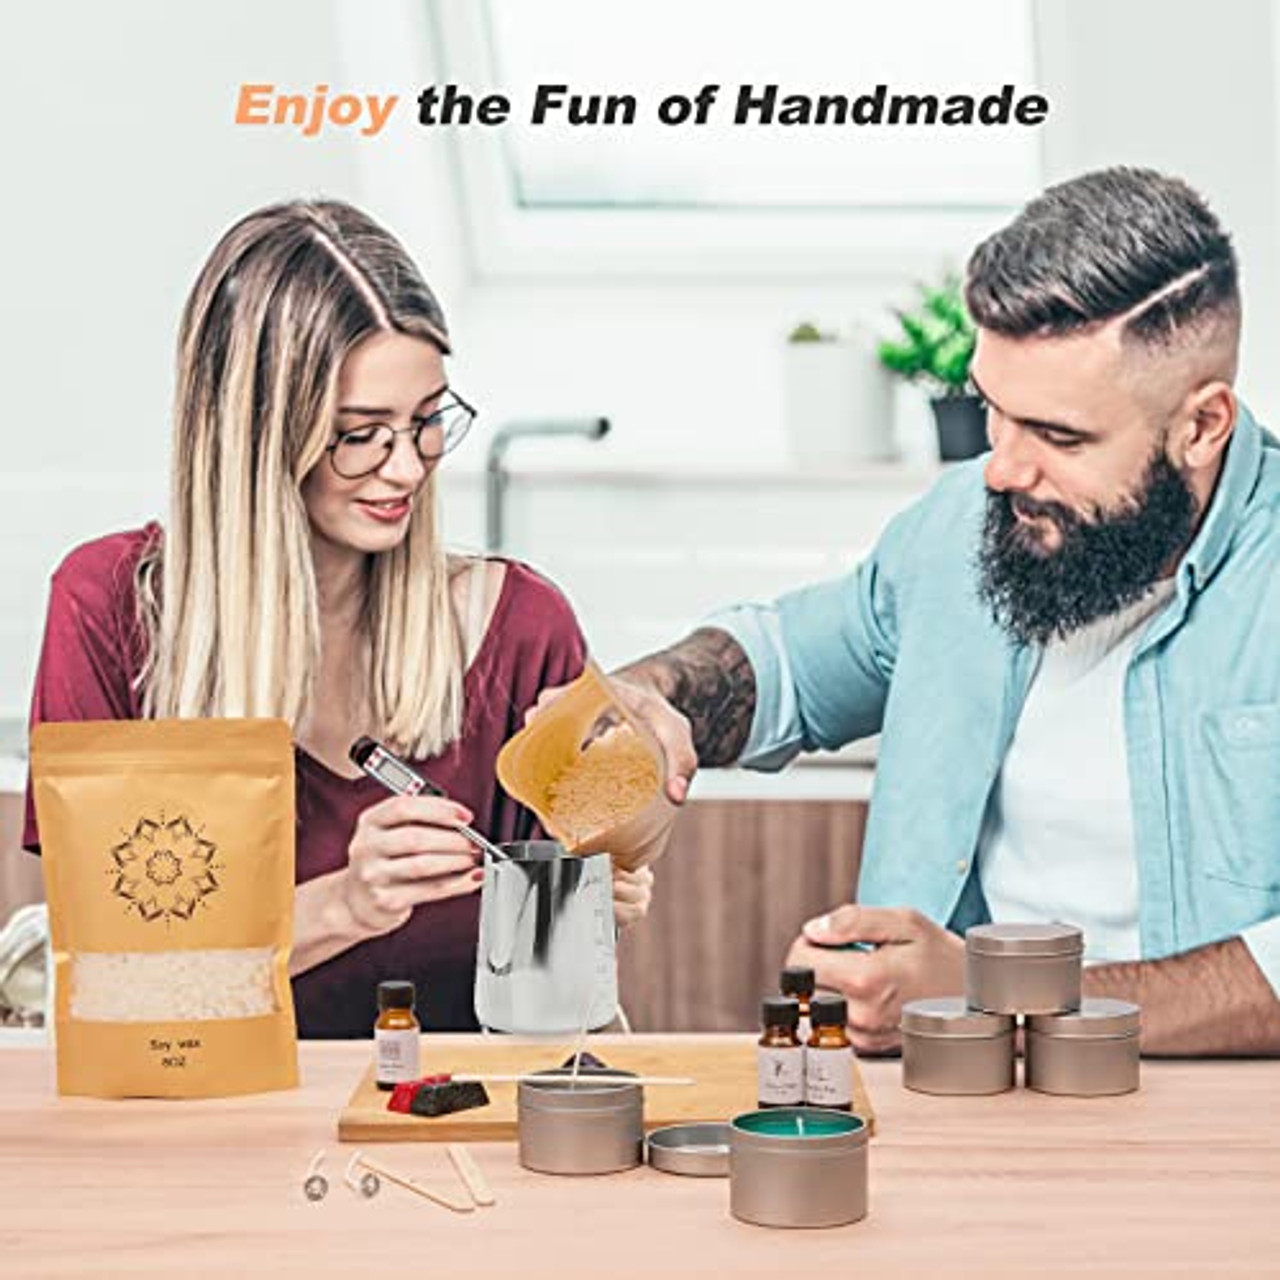 DIY Candle Making Kit for Adults,Beginners & Kids The DIY Arts & Crafts Kit  for